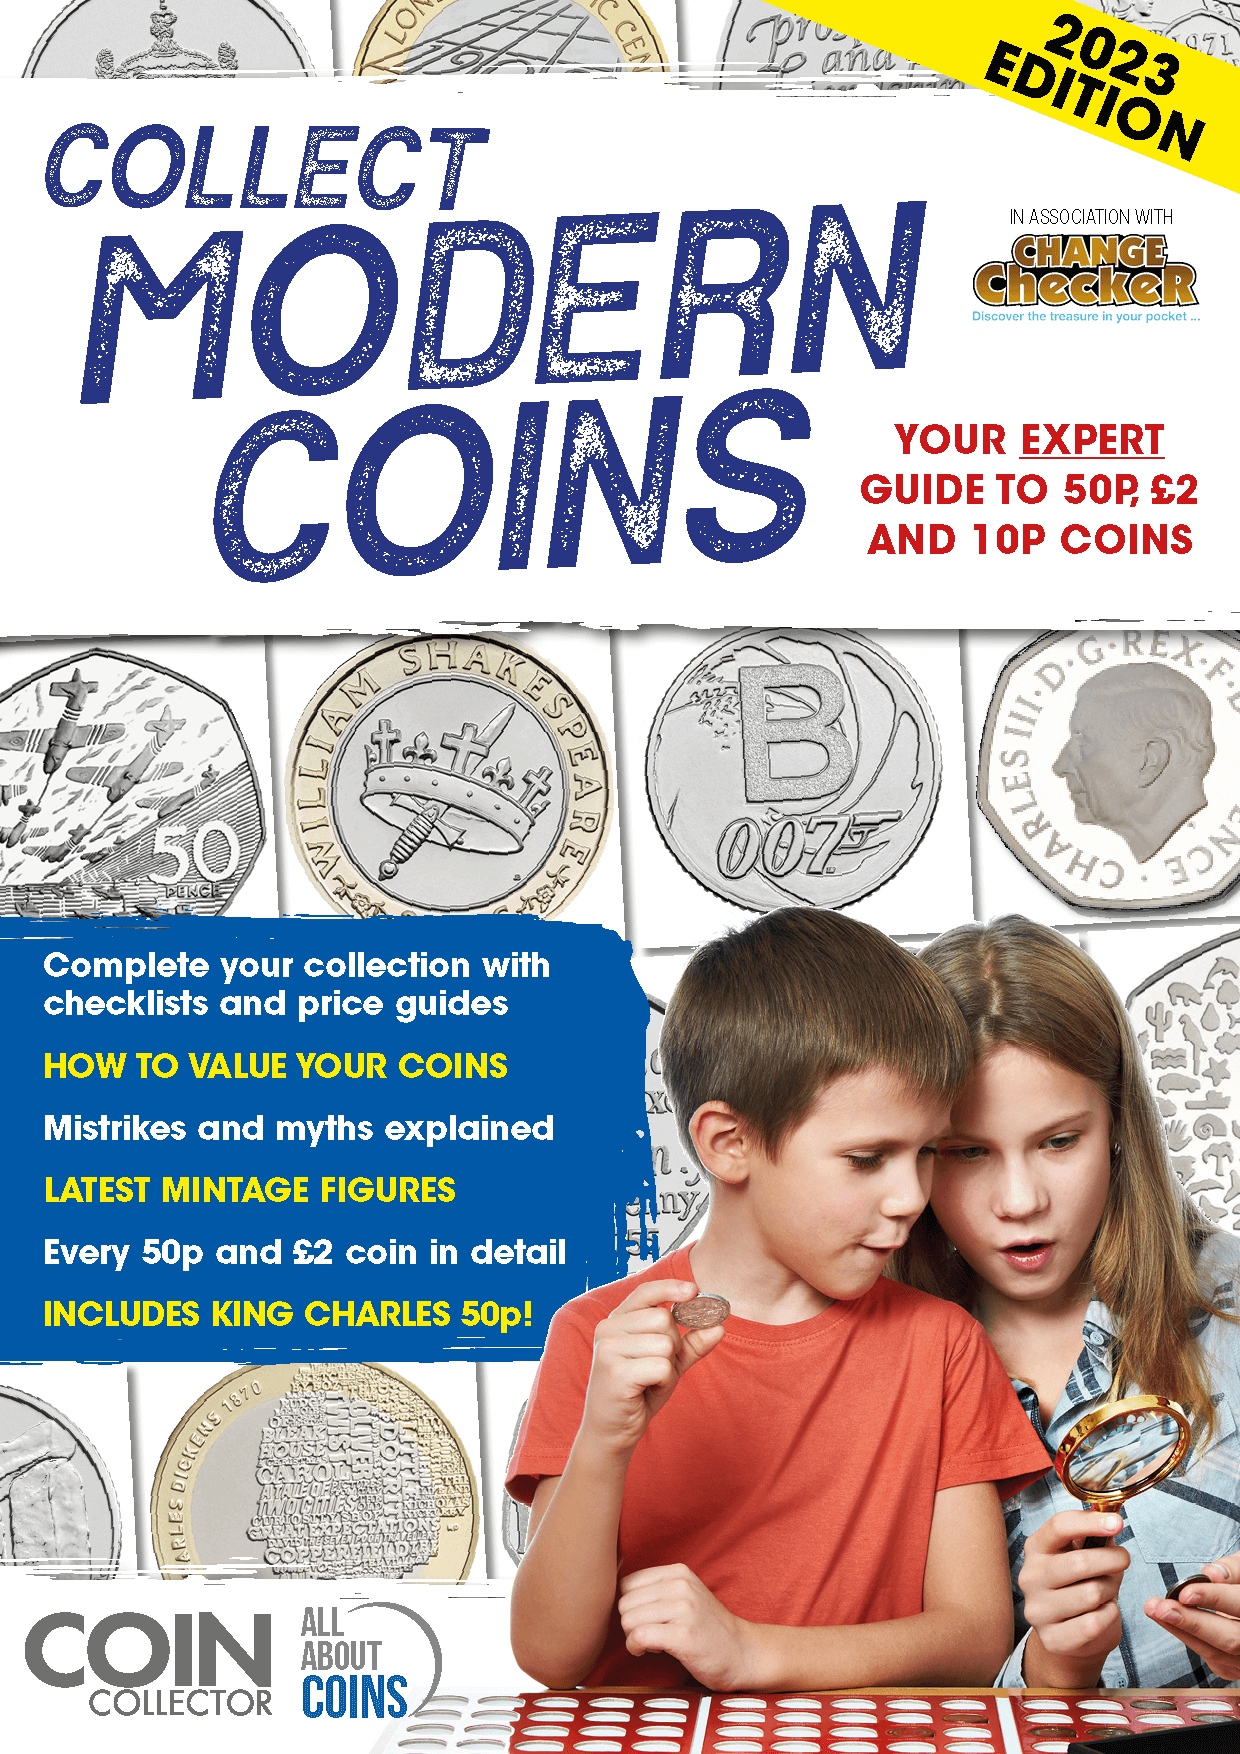 Free Coin Collector gift